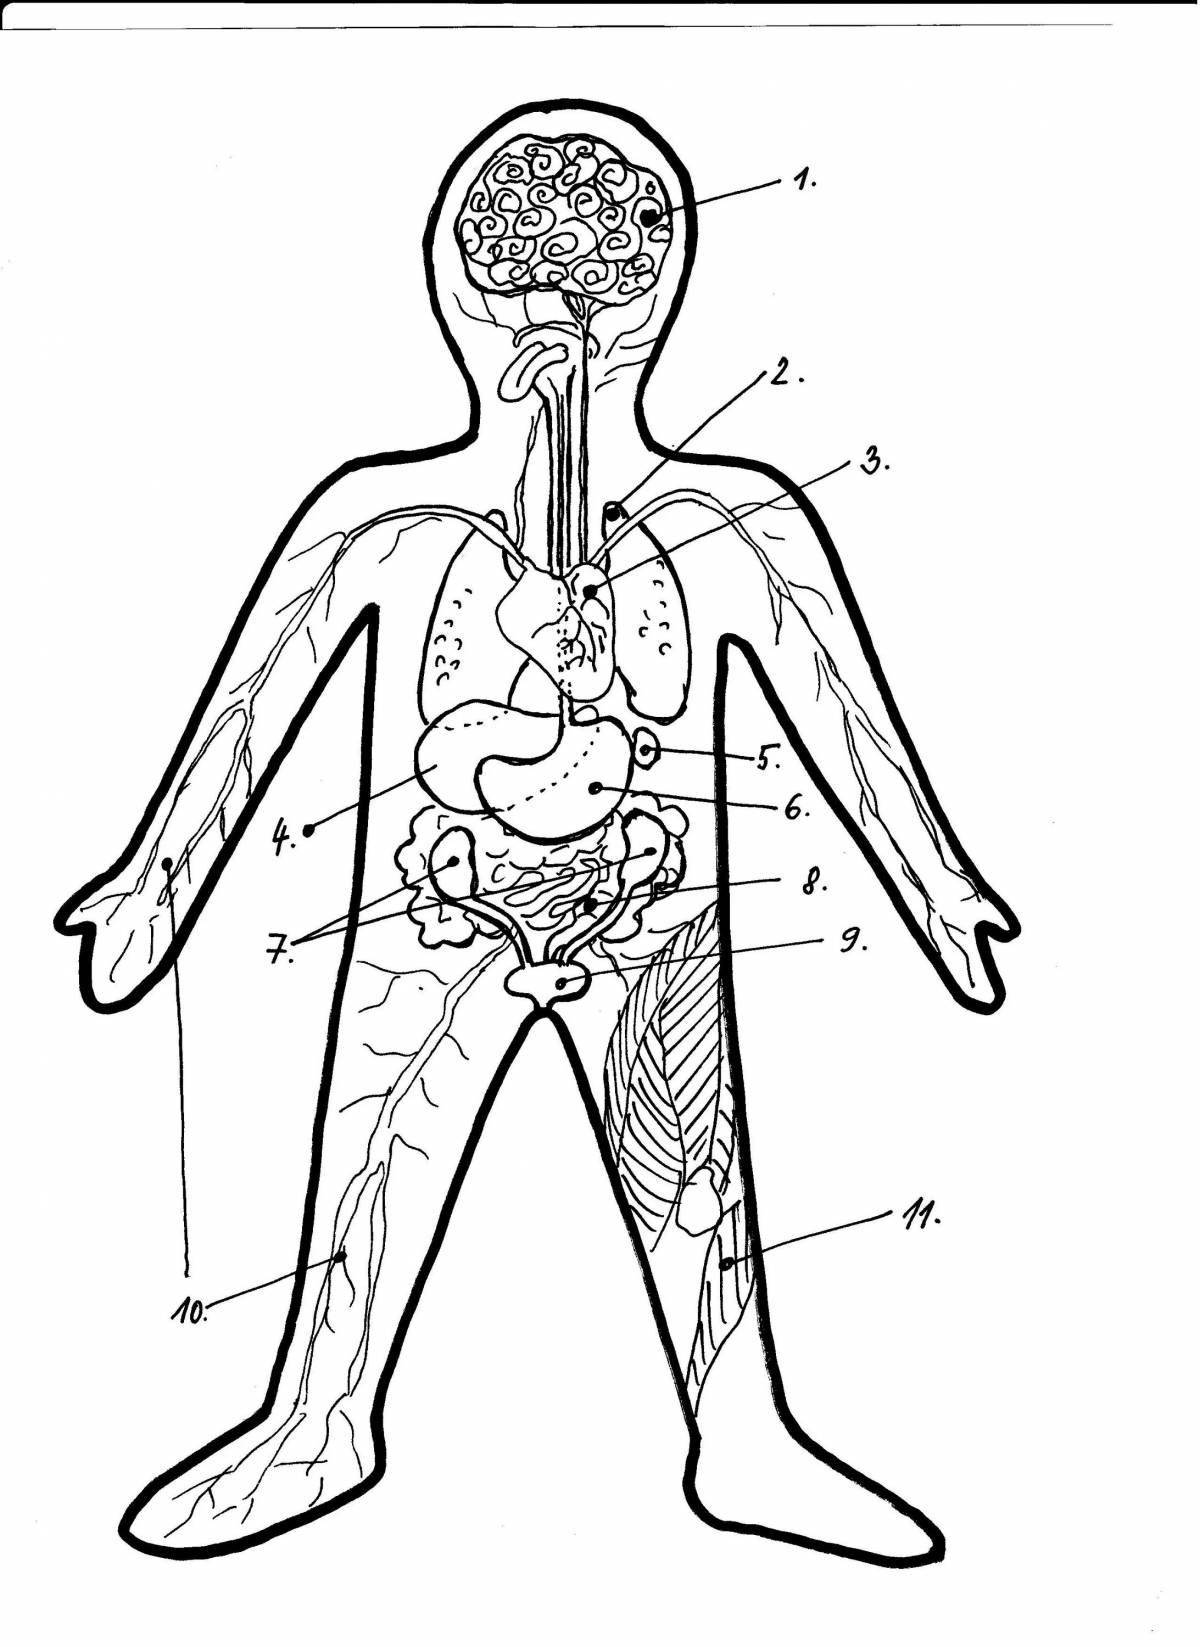 Interesting human anatomy coloring page for kids